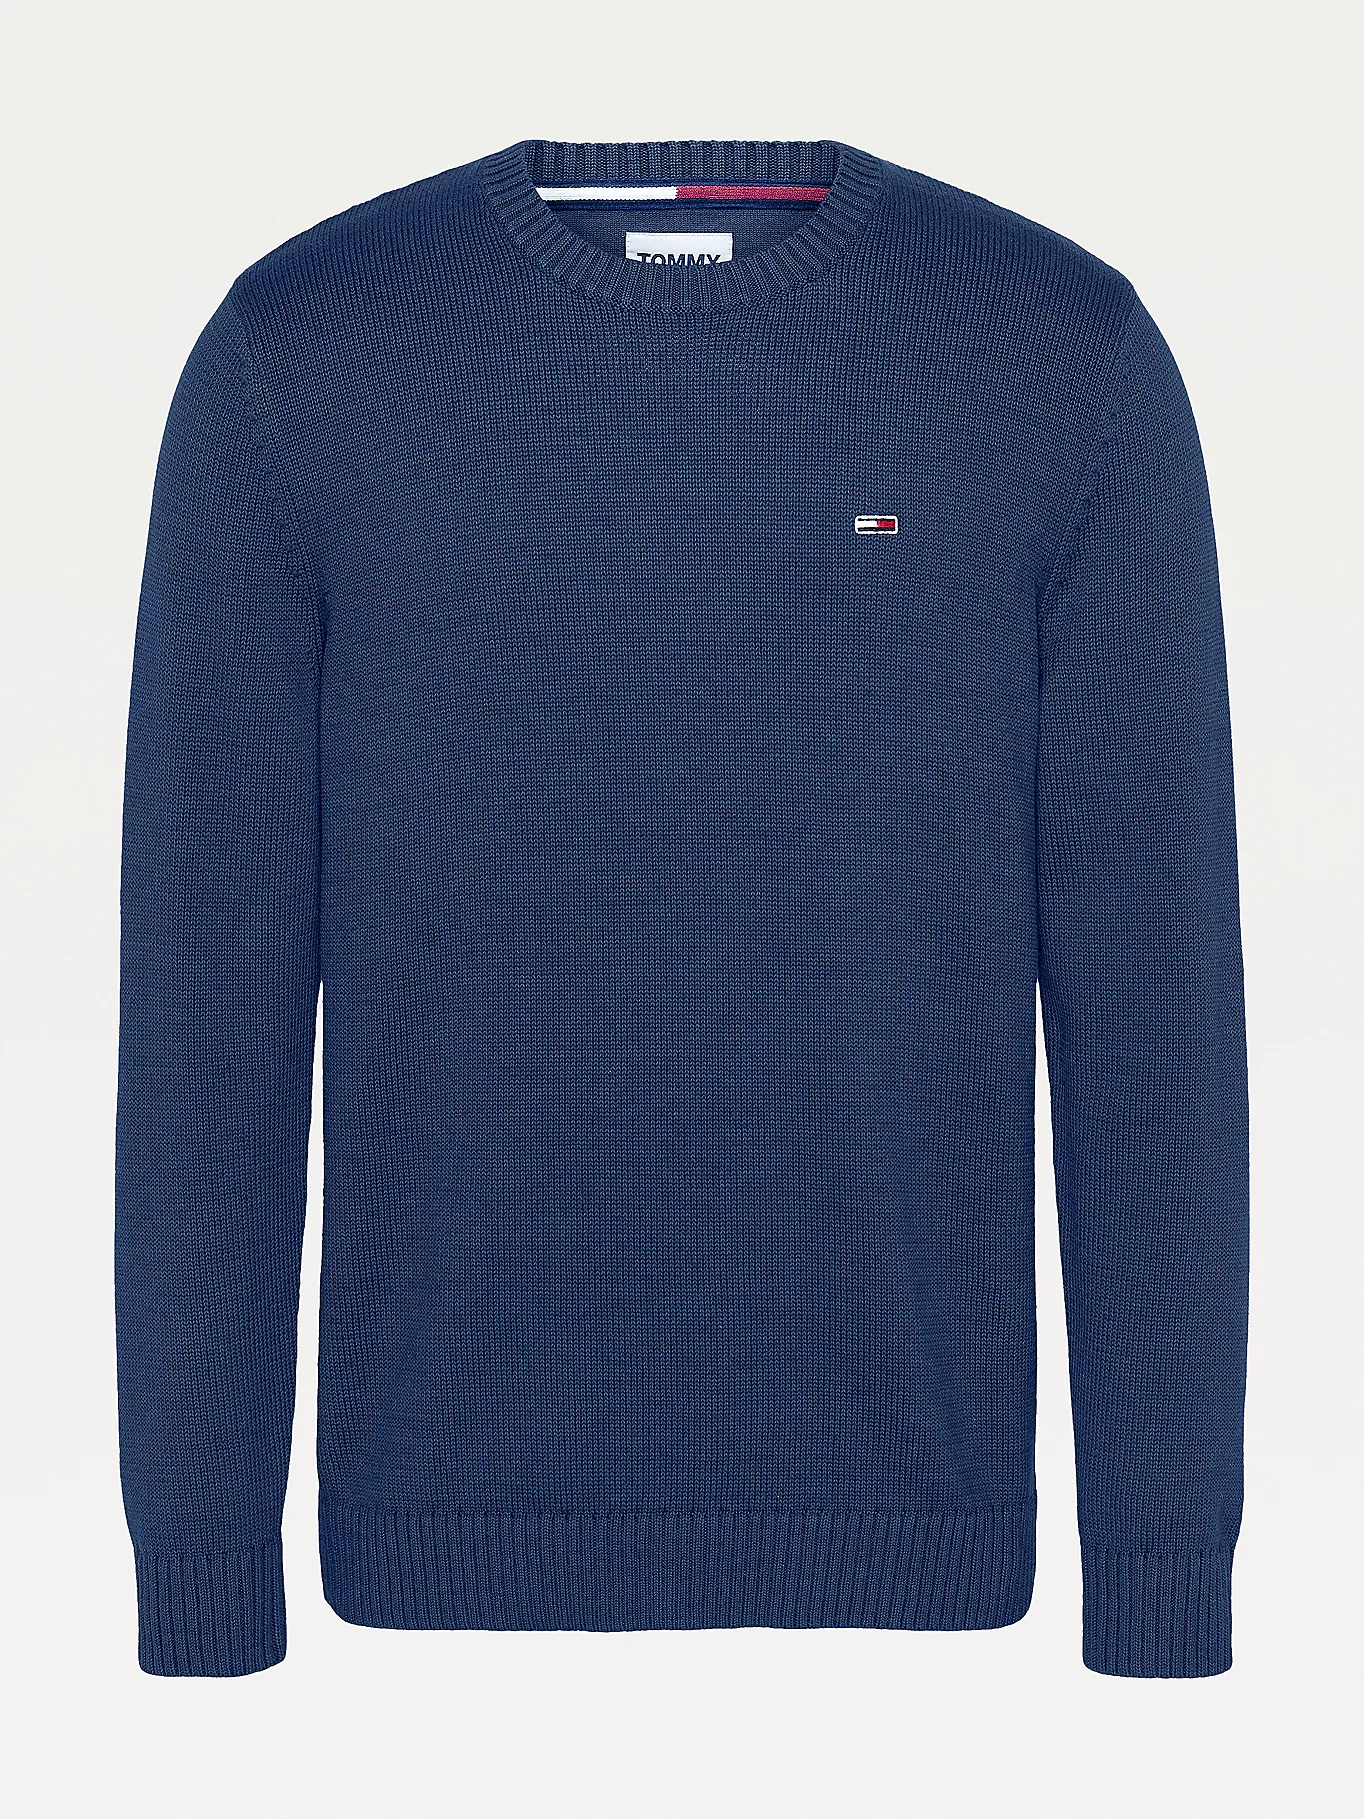 Buy Tommy Jeans Essential Crew Neck Twilight Navy - Scandinavian Fashion  Store